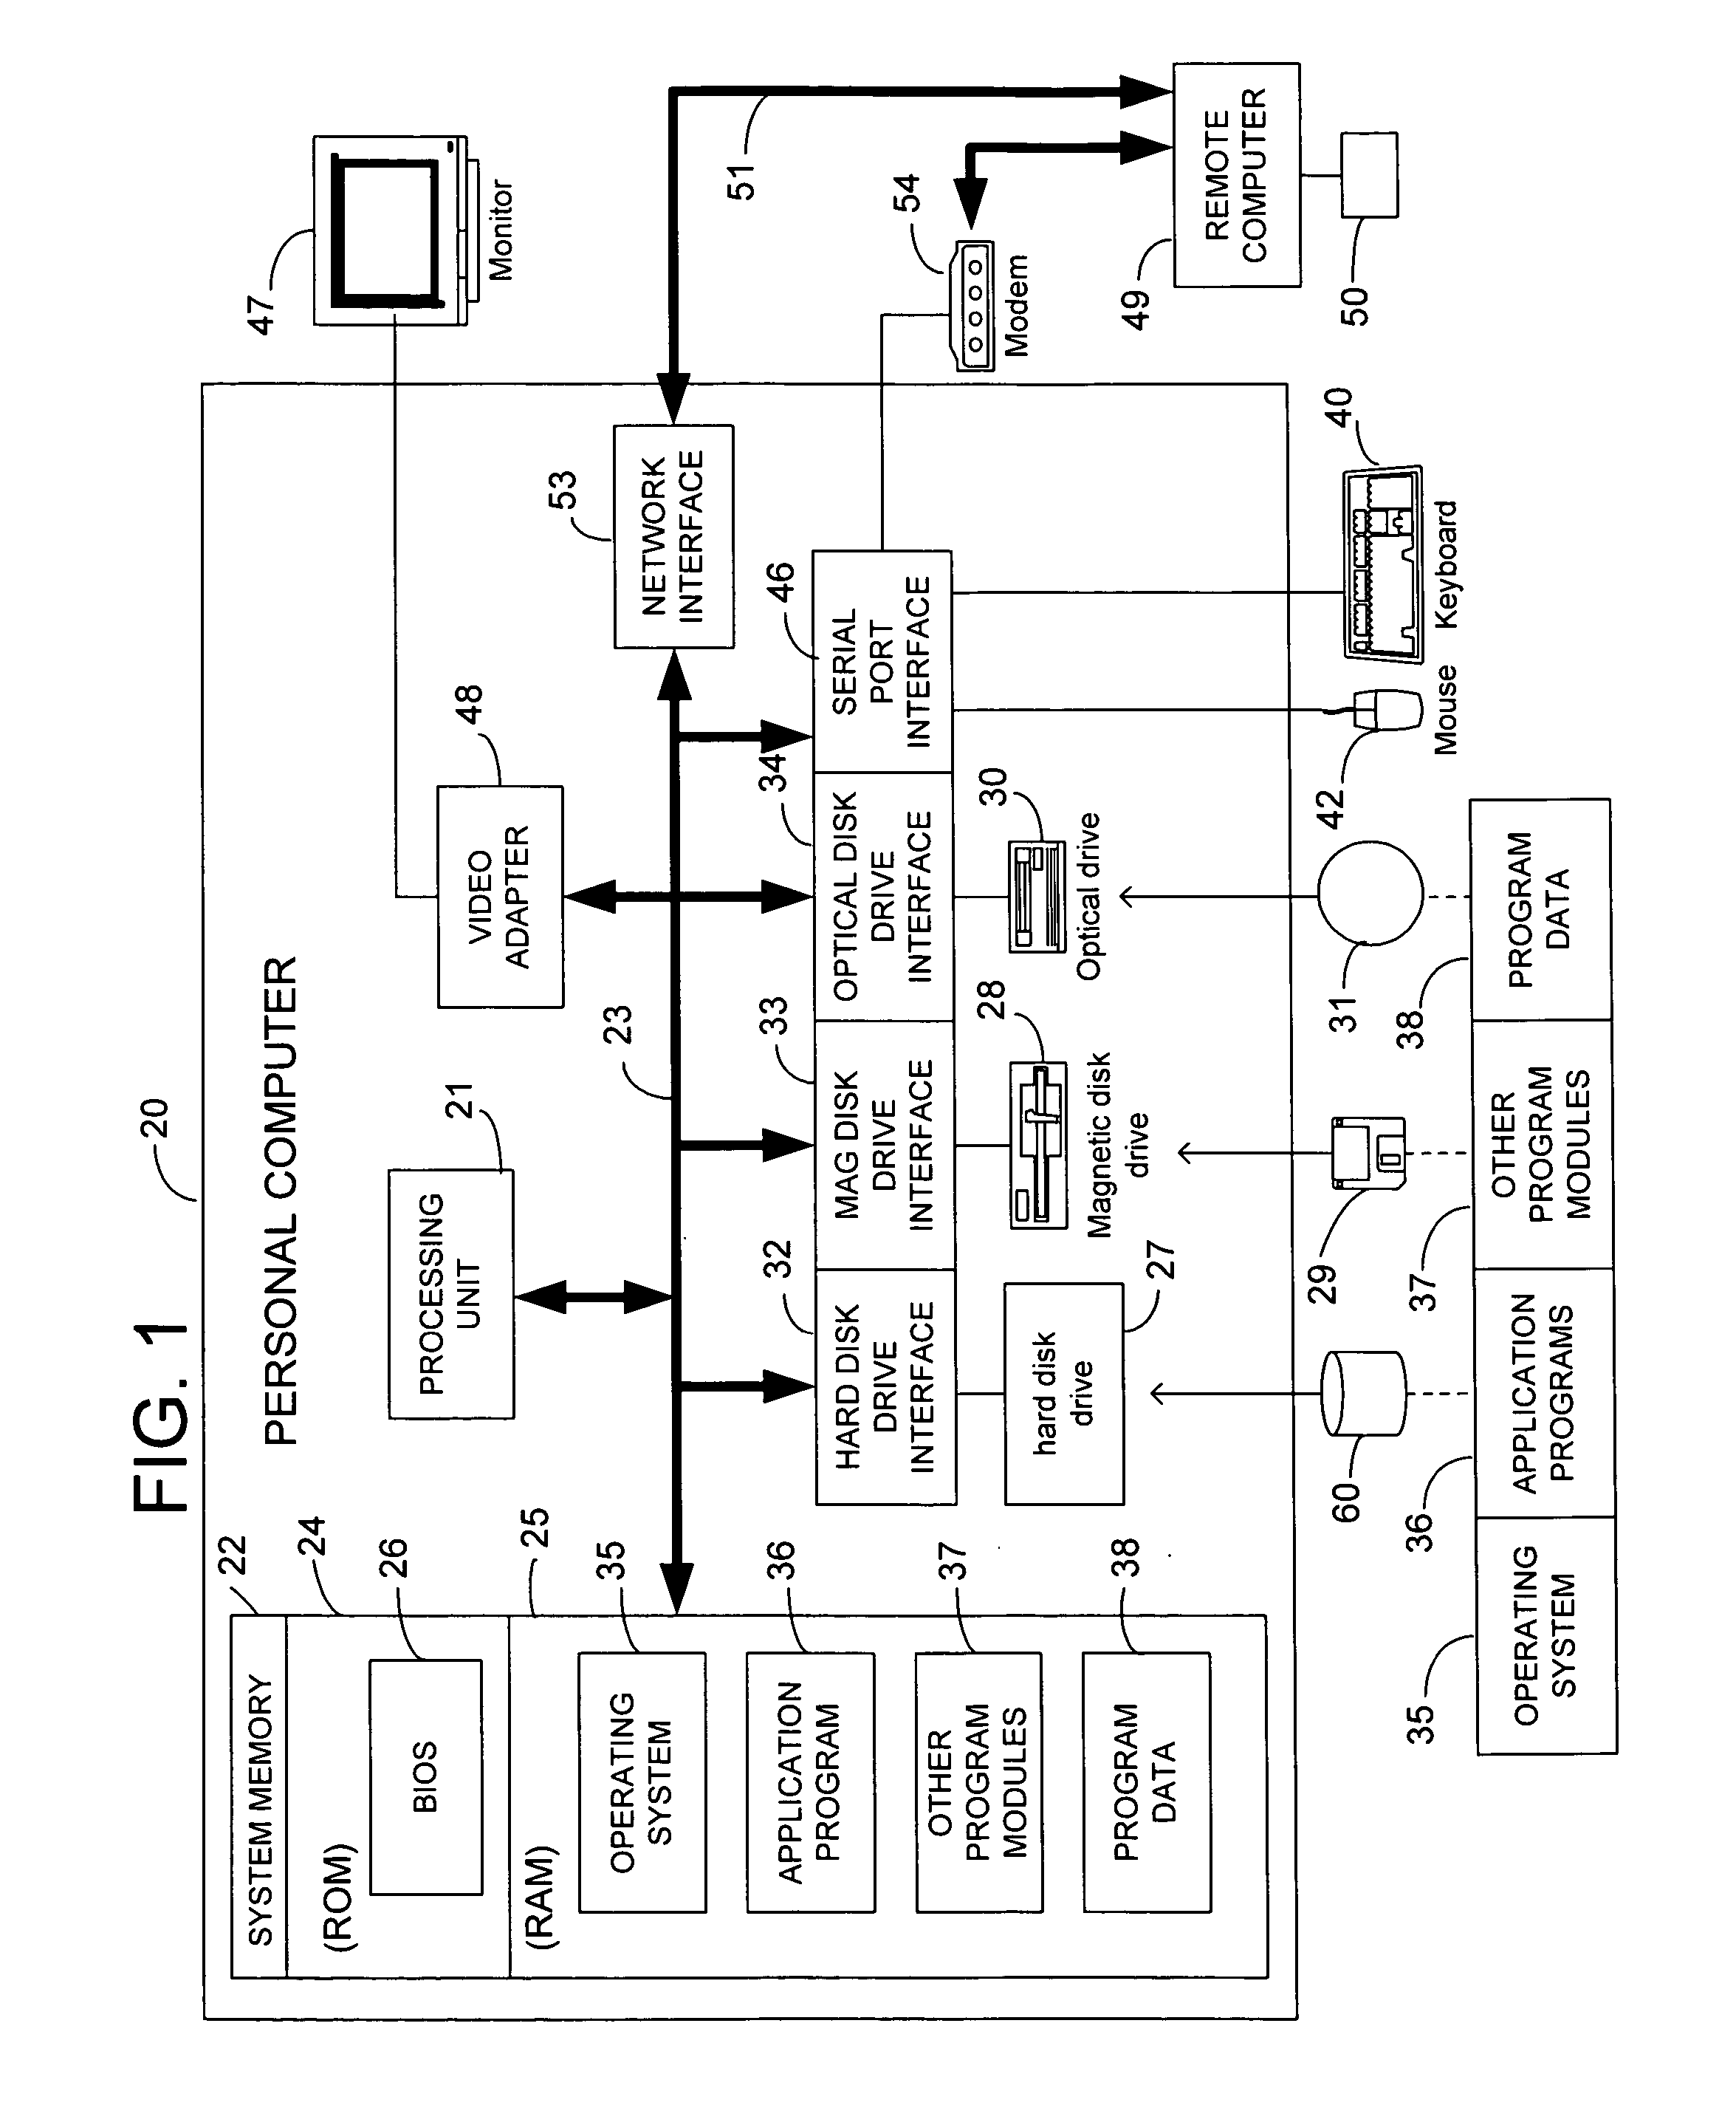 Method and system for expansion of recurring calendar events